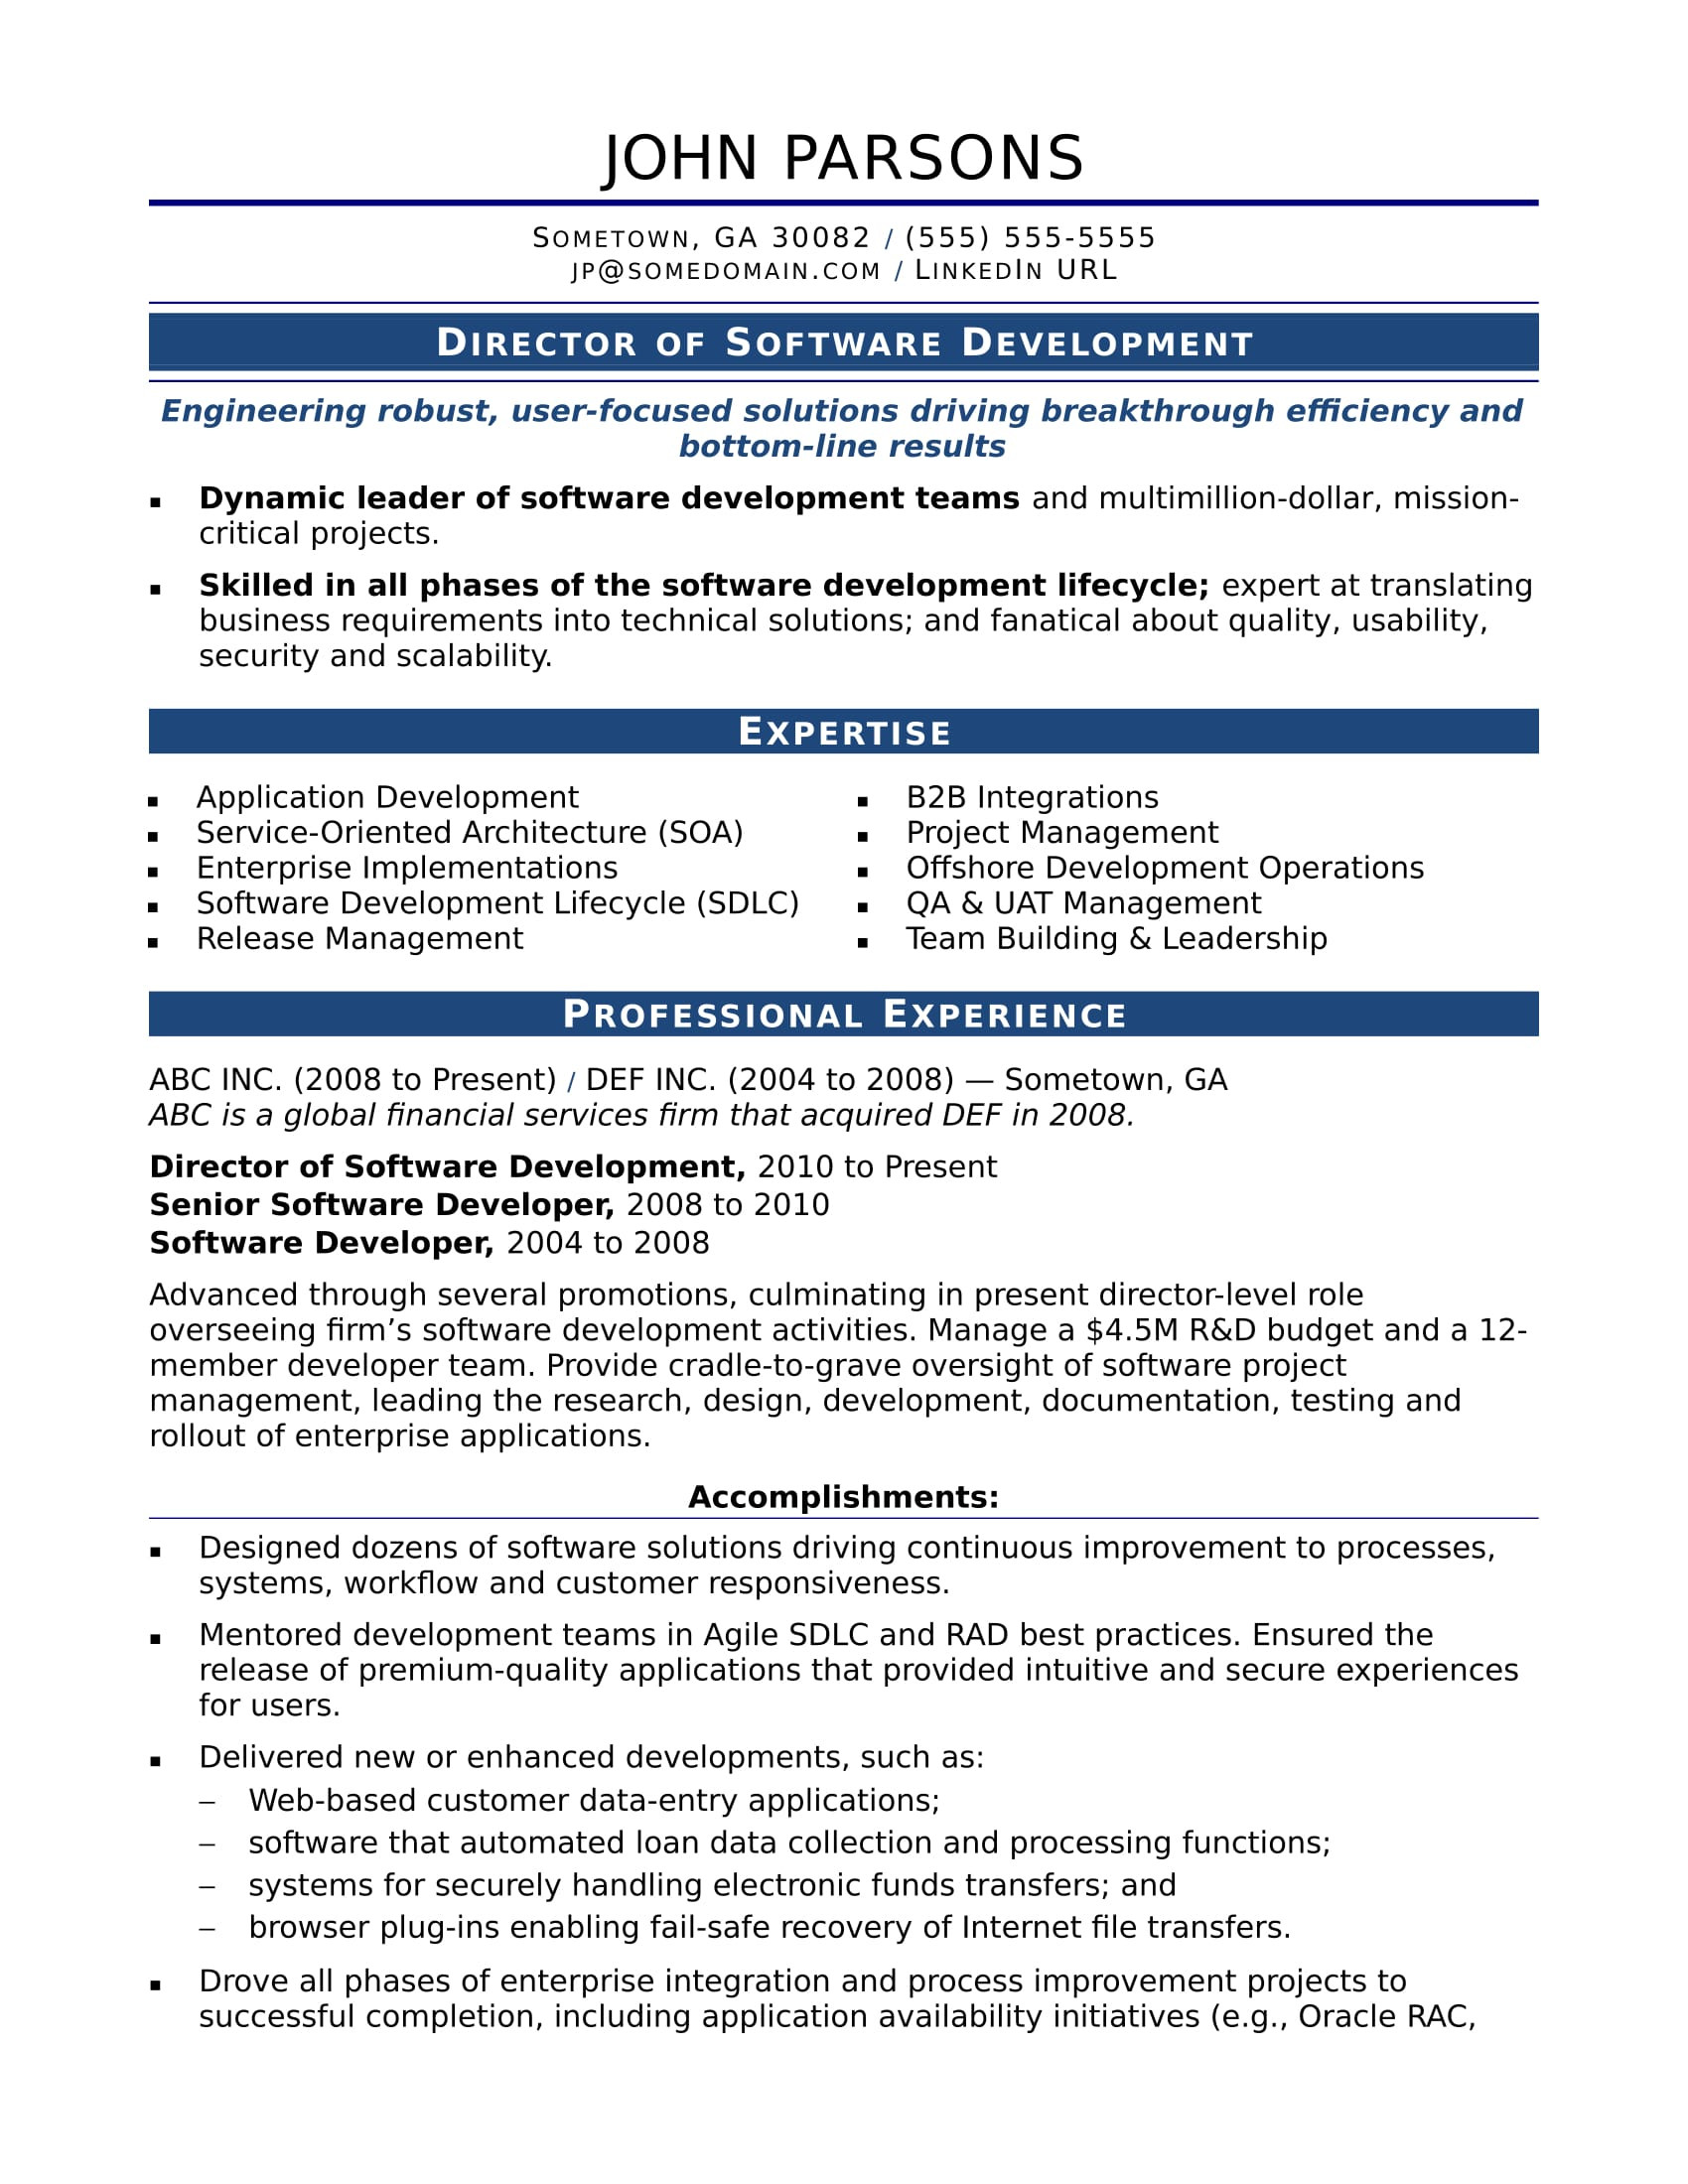 Experienced software Engineer Resume Template Free Download Sample Resume for An Experienced It Developer Monster.com